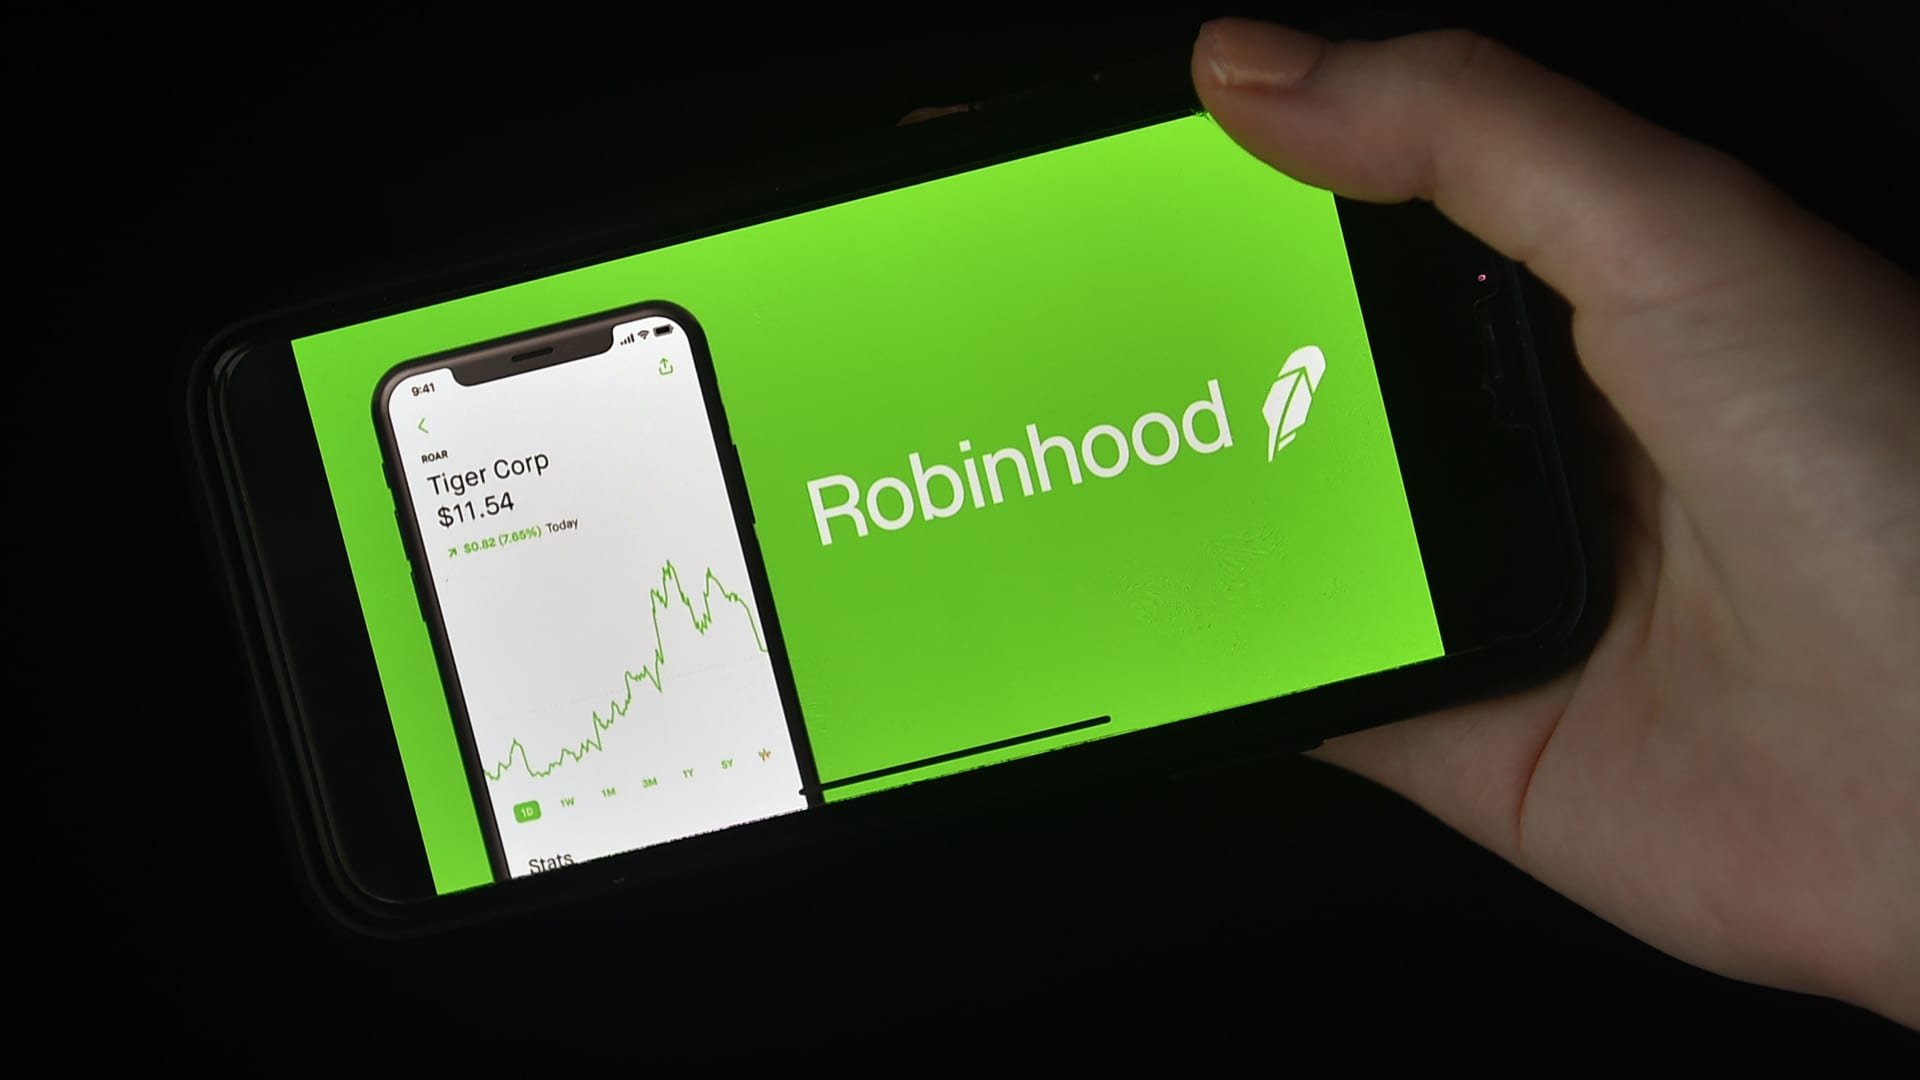 Robinhood restricts crypto trading 'due to extraordinary market conditions'